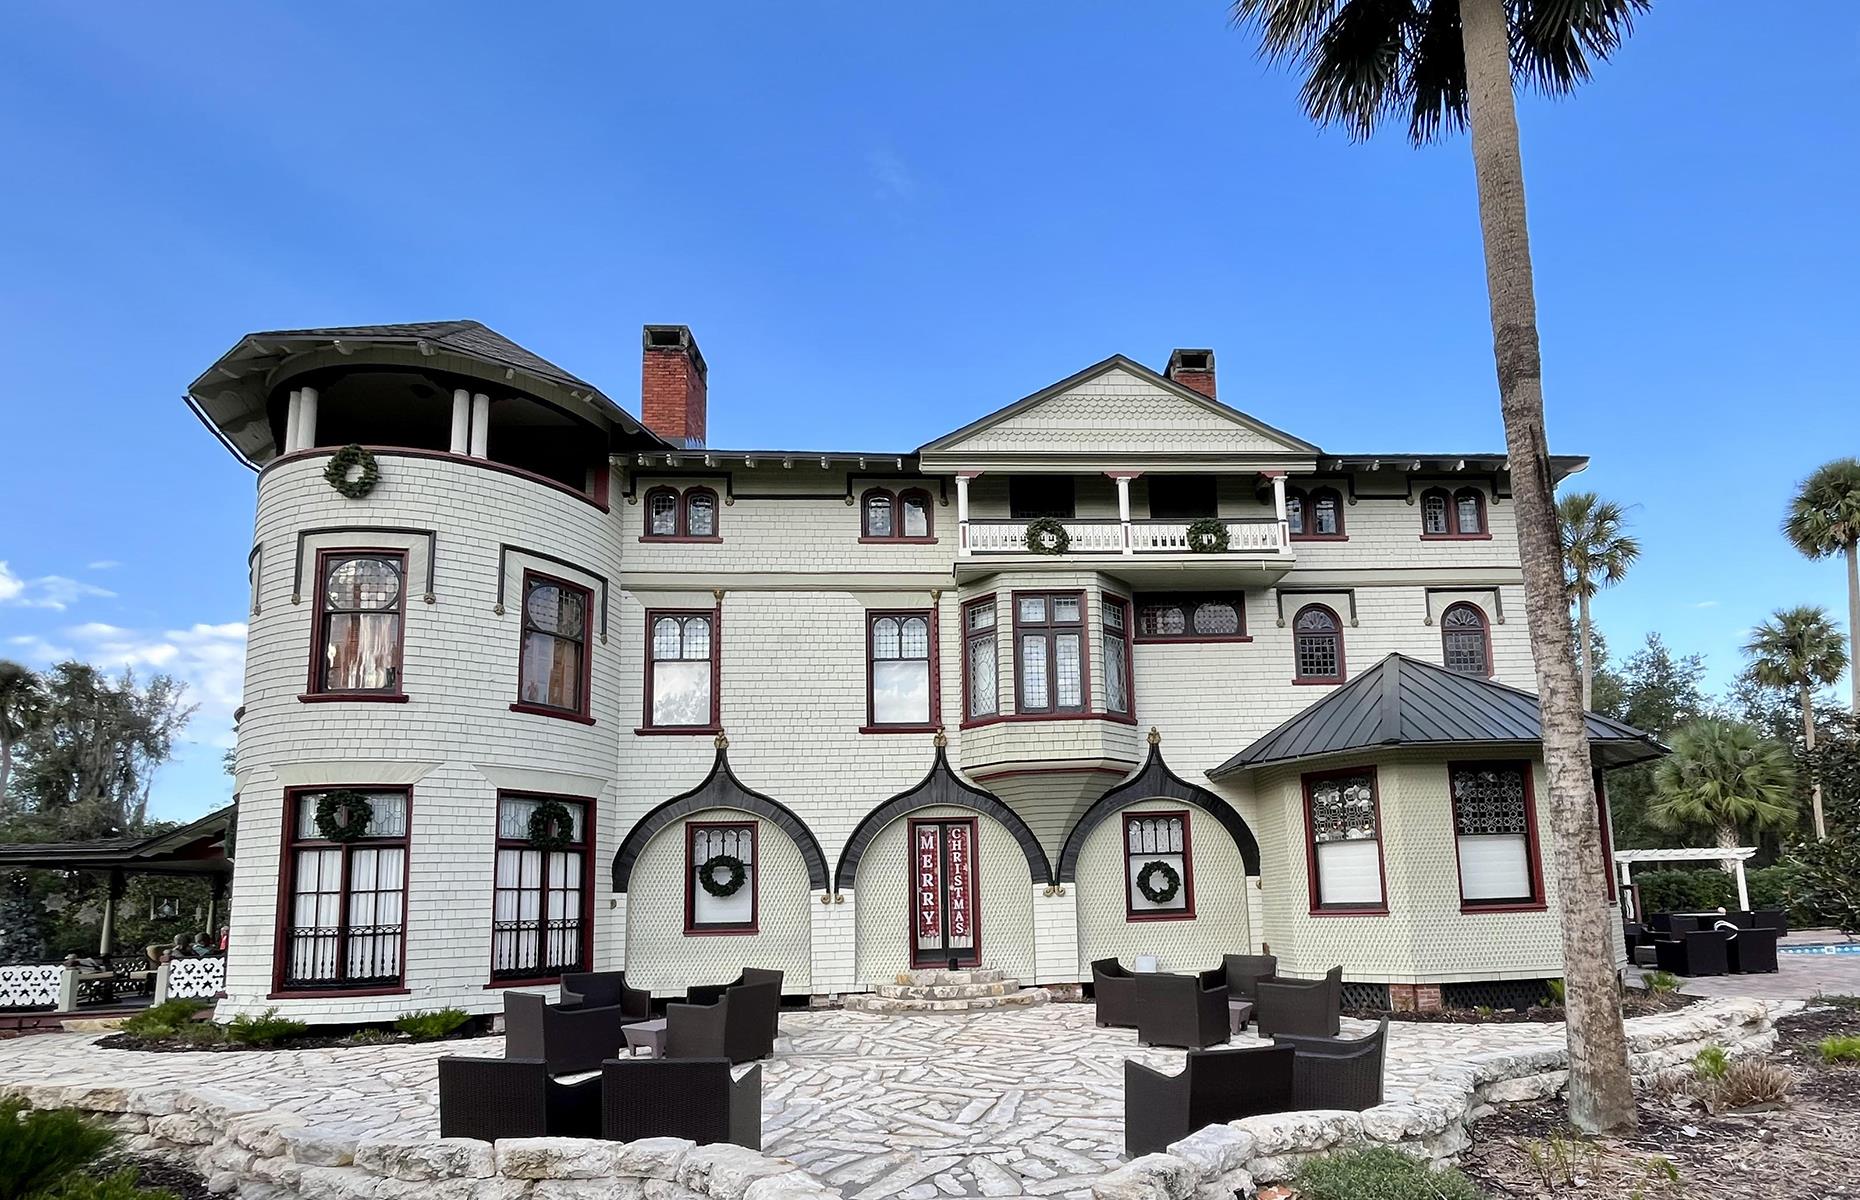 <p>Built for John B. Stetson, the inventor of the Stetson hat, this Florida mansion was finished in 1886 and features 16 distinct rooms across more than 8,000 square feet (743sqm) of living space. Apart from ornate woodwork and stained-glass windows, the mansion has a few surprises up its sleeve. Those who join a tour will be shown to a hidden door, among other unique features. The house was also home to writer and poet Elizabeth Barrett Browning and even featured on TV show <em>Ghost Hunters</em>.</p>